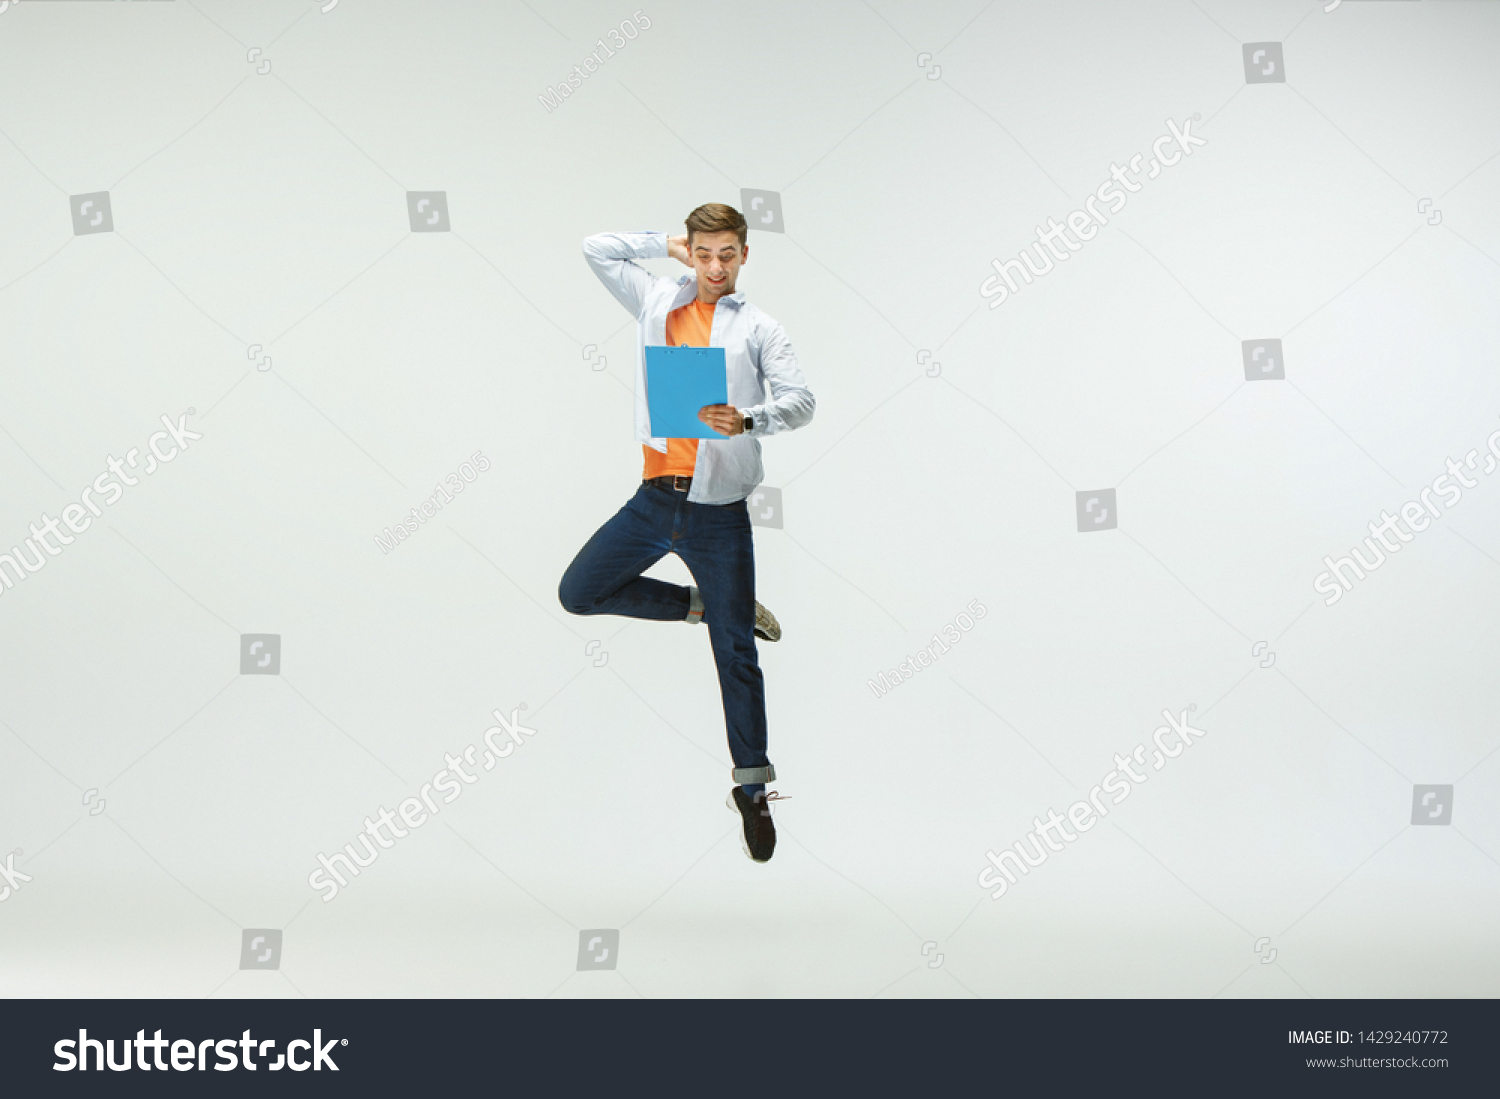 Happy young man working at office, jumping and dancing in casual clothes or suit isolated on white studio background. Business, start-up, working open-space, ballet or professional occupation concept. #1429240772